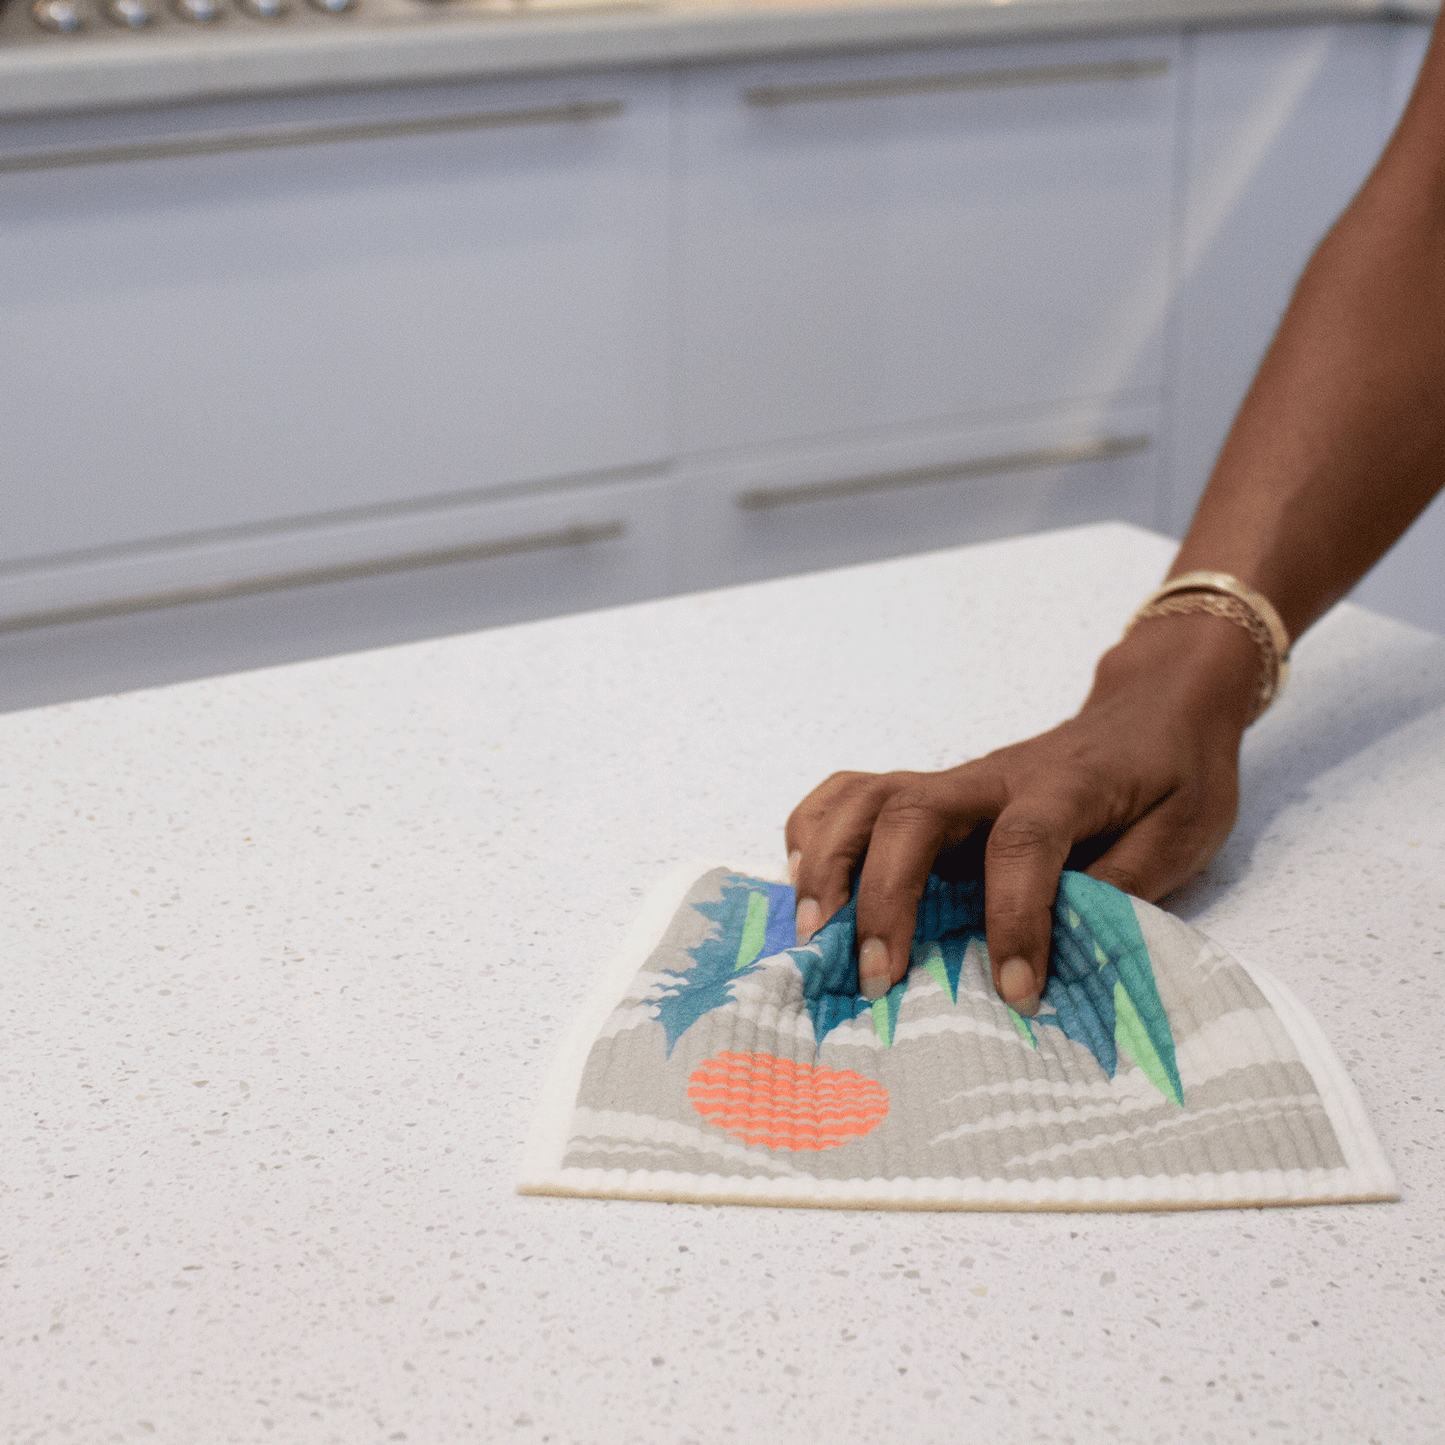 Hand using Pacific Northwest Sponge Cloth to wipe a kitchen counter. Sponge cloth is flexible and is softly crumpled in the hand's grasp.